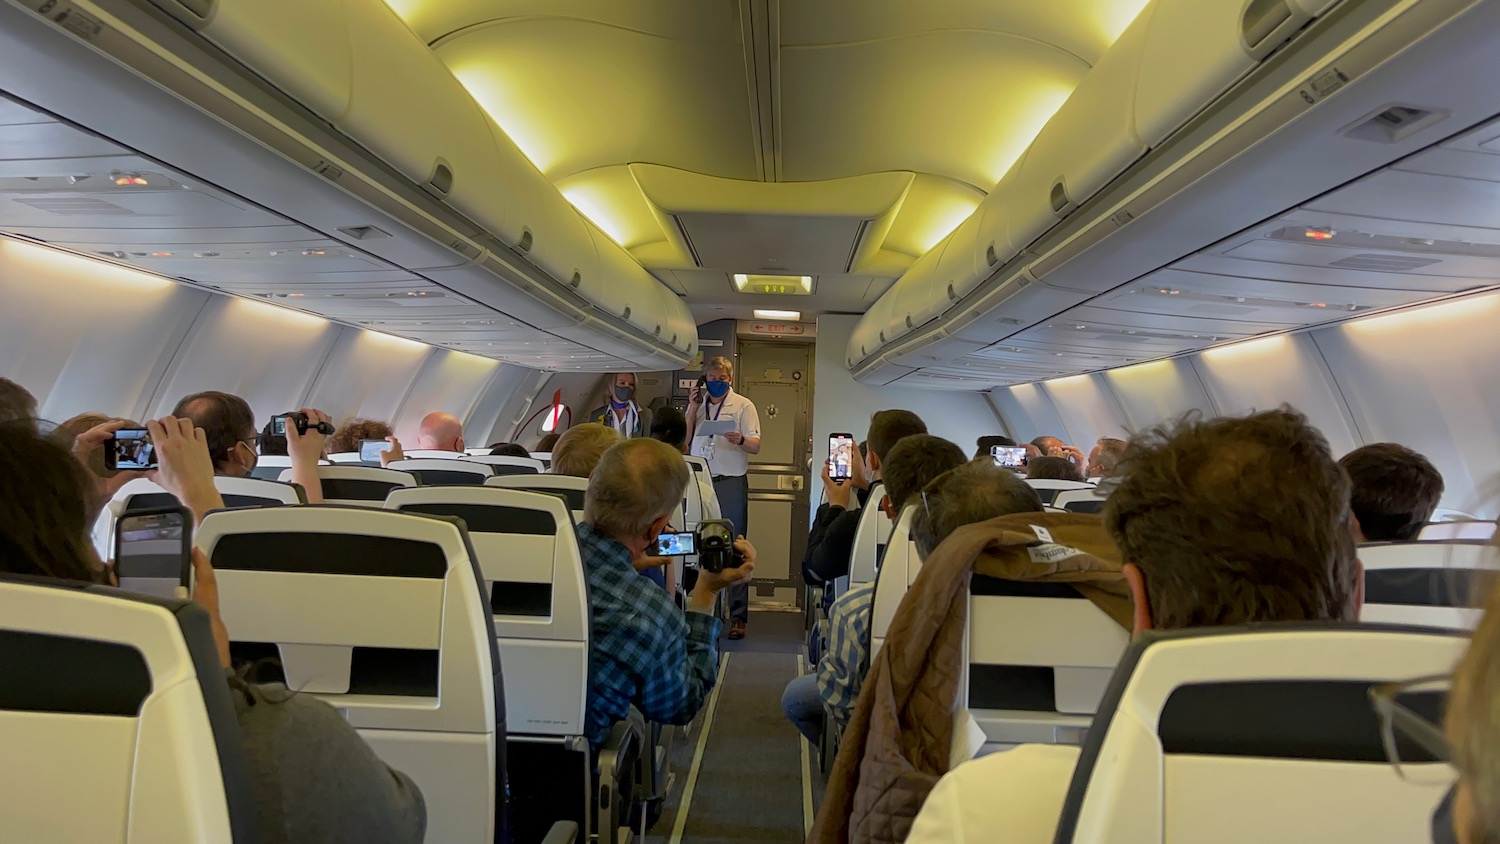 a man standing in an airplane with a group of people